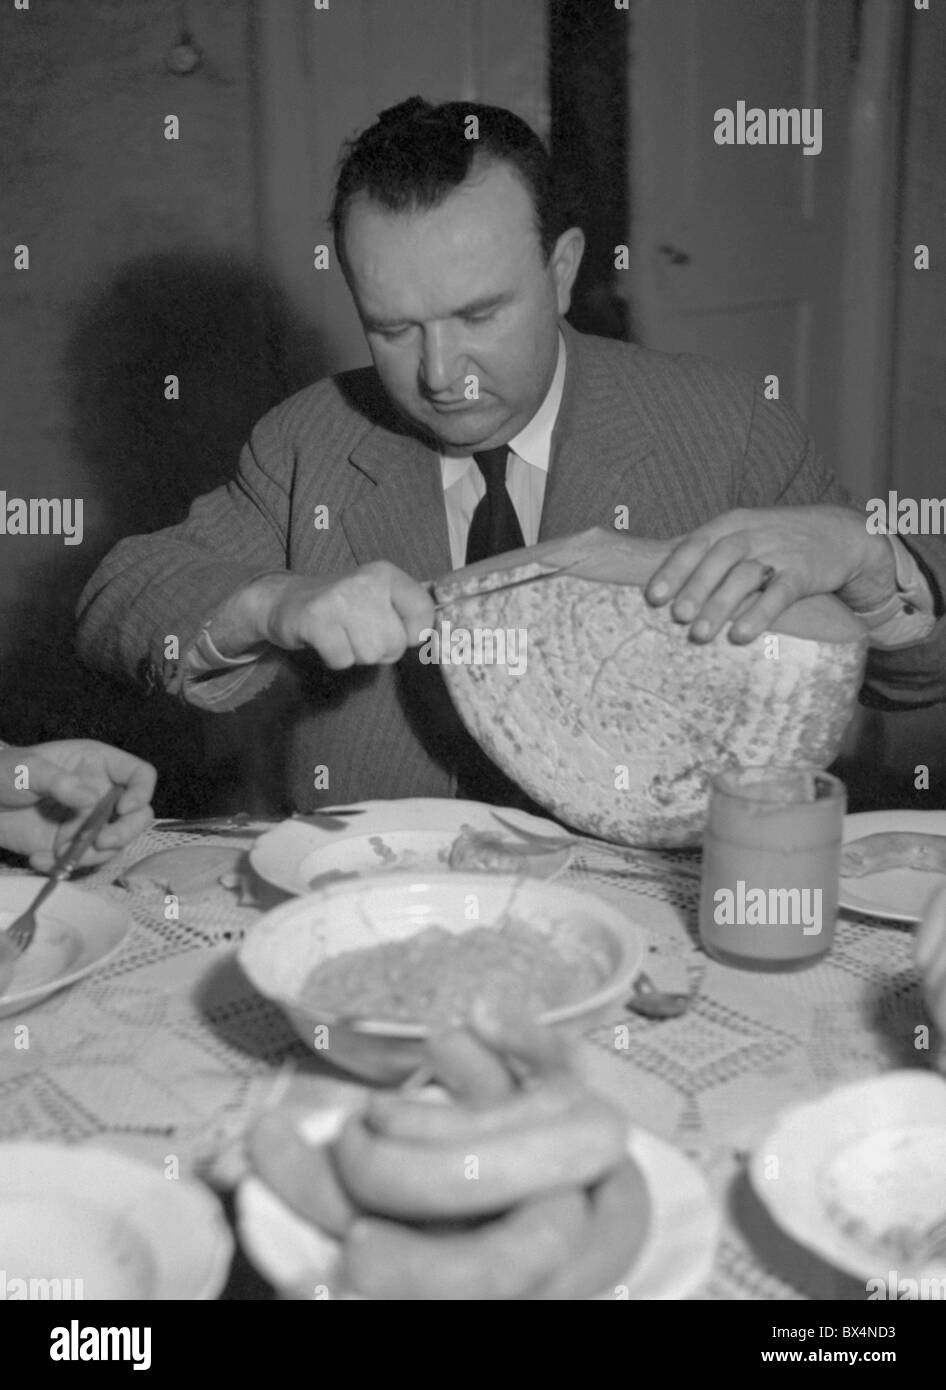 Czechoslovakia 1939, traditional home style hog slaying. Man slicing loaf of bread before feast Stock Photo